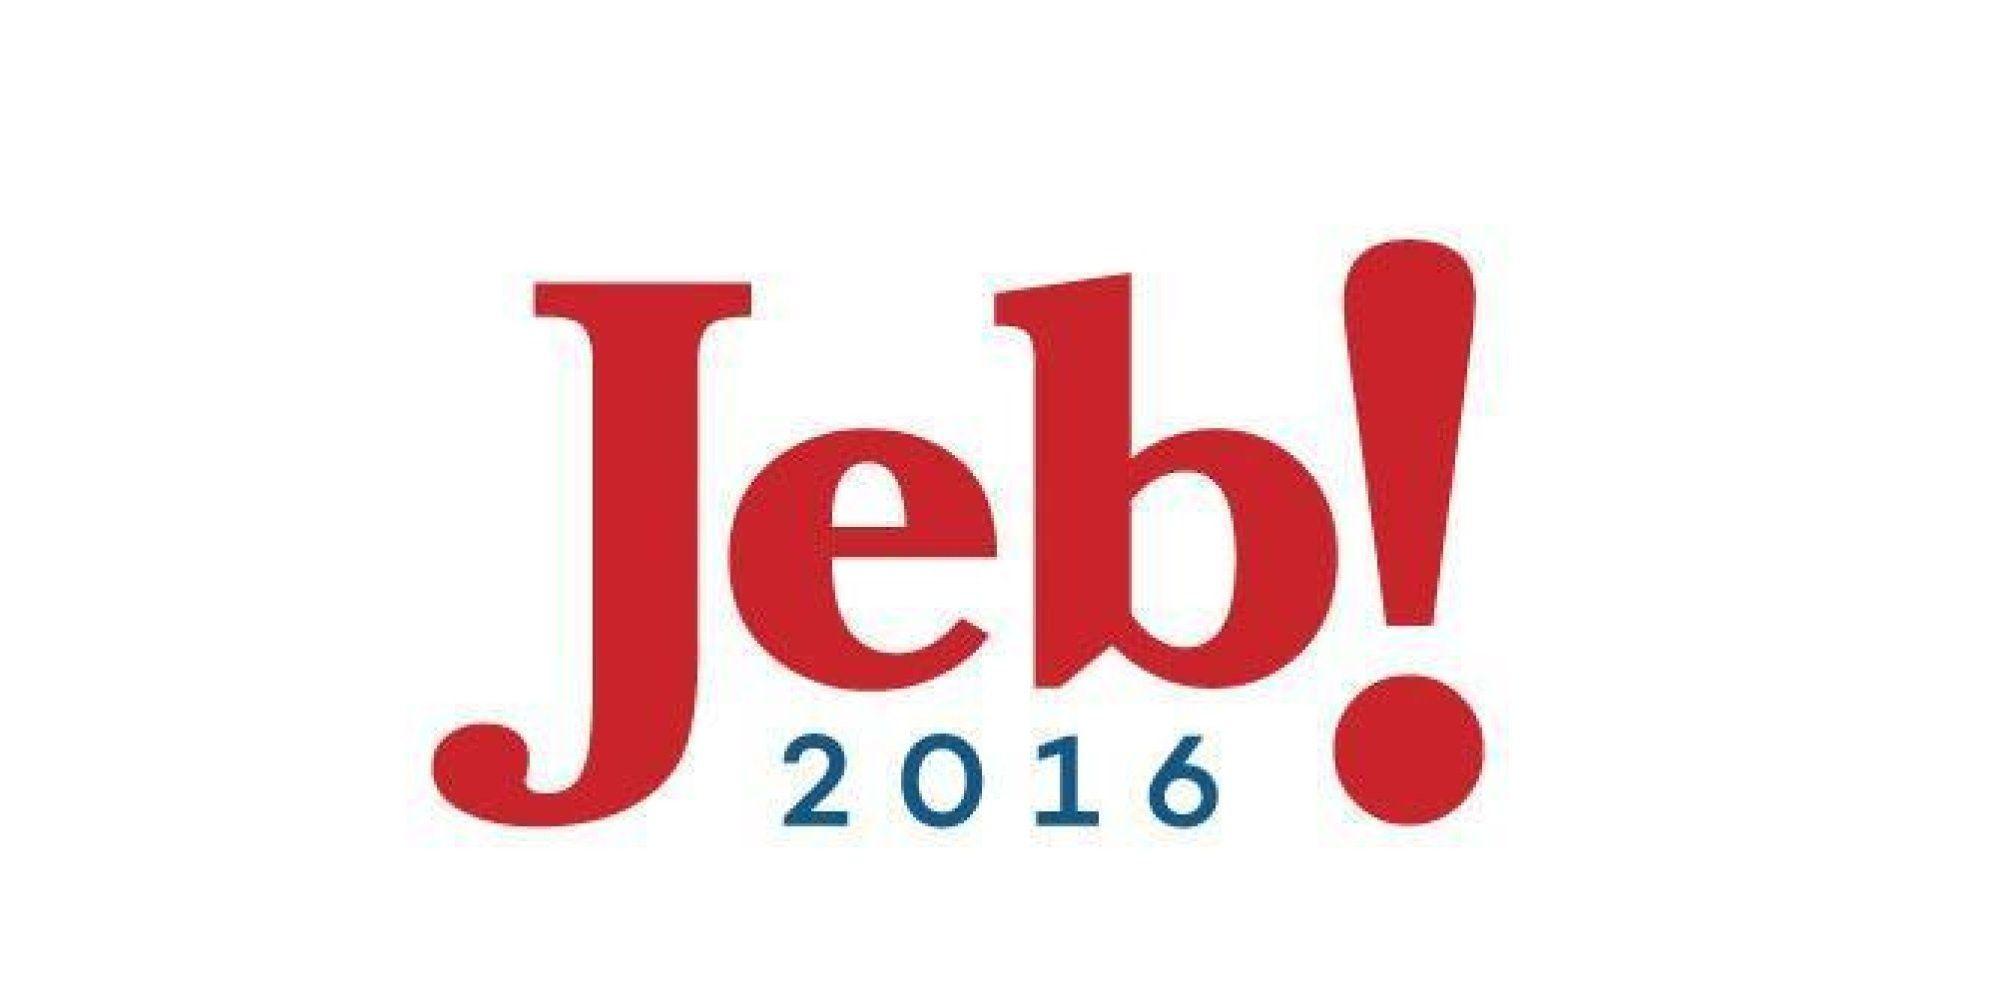 Exclamation Point Logo - So Long, Exclamation Point in Jeb!